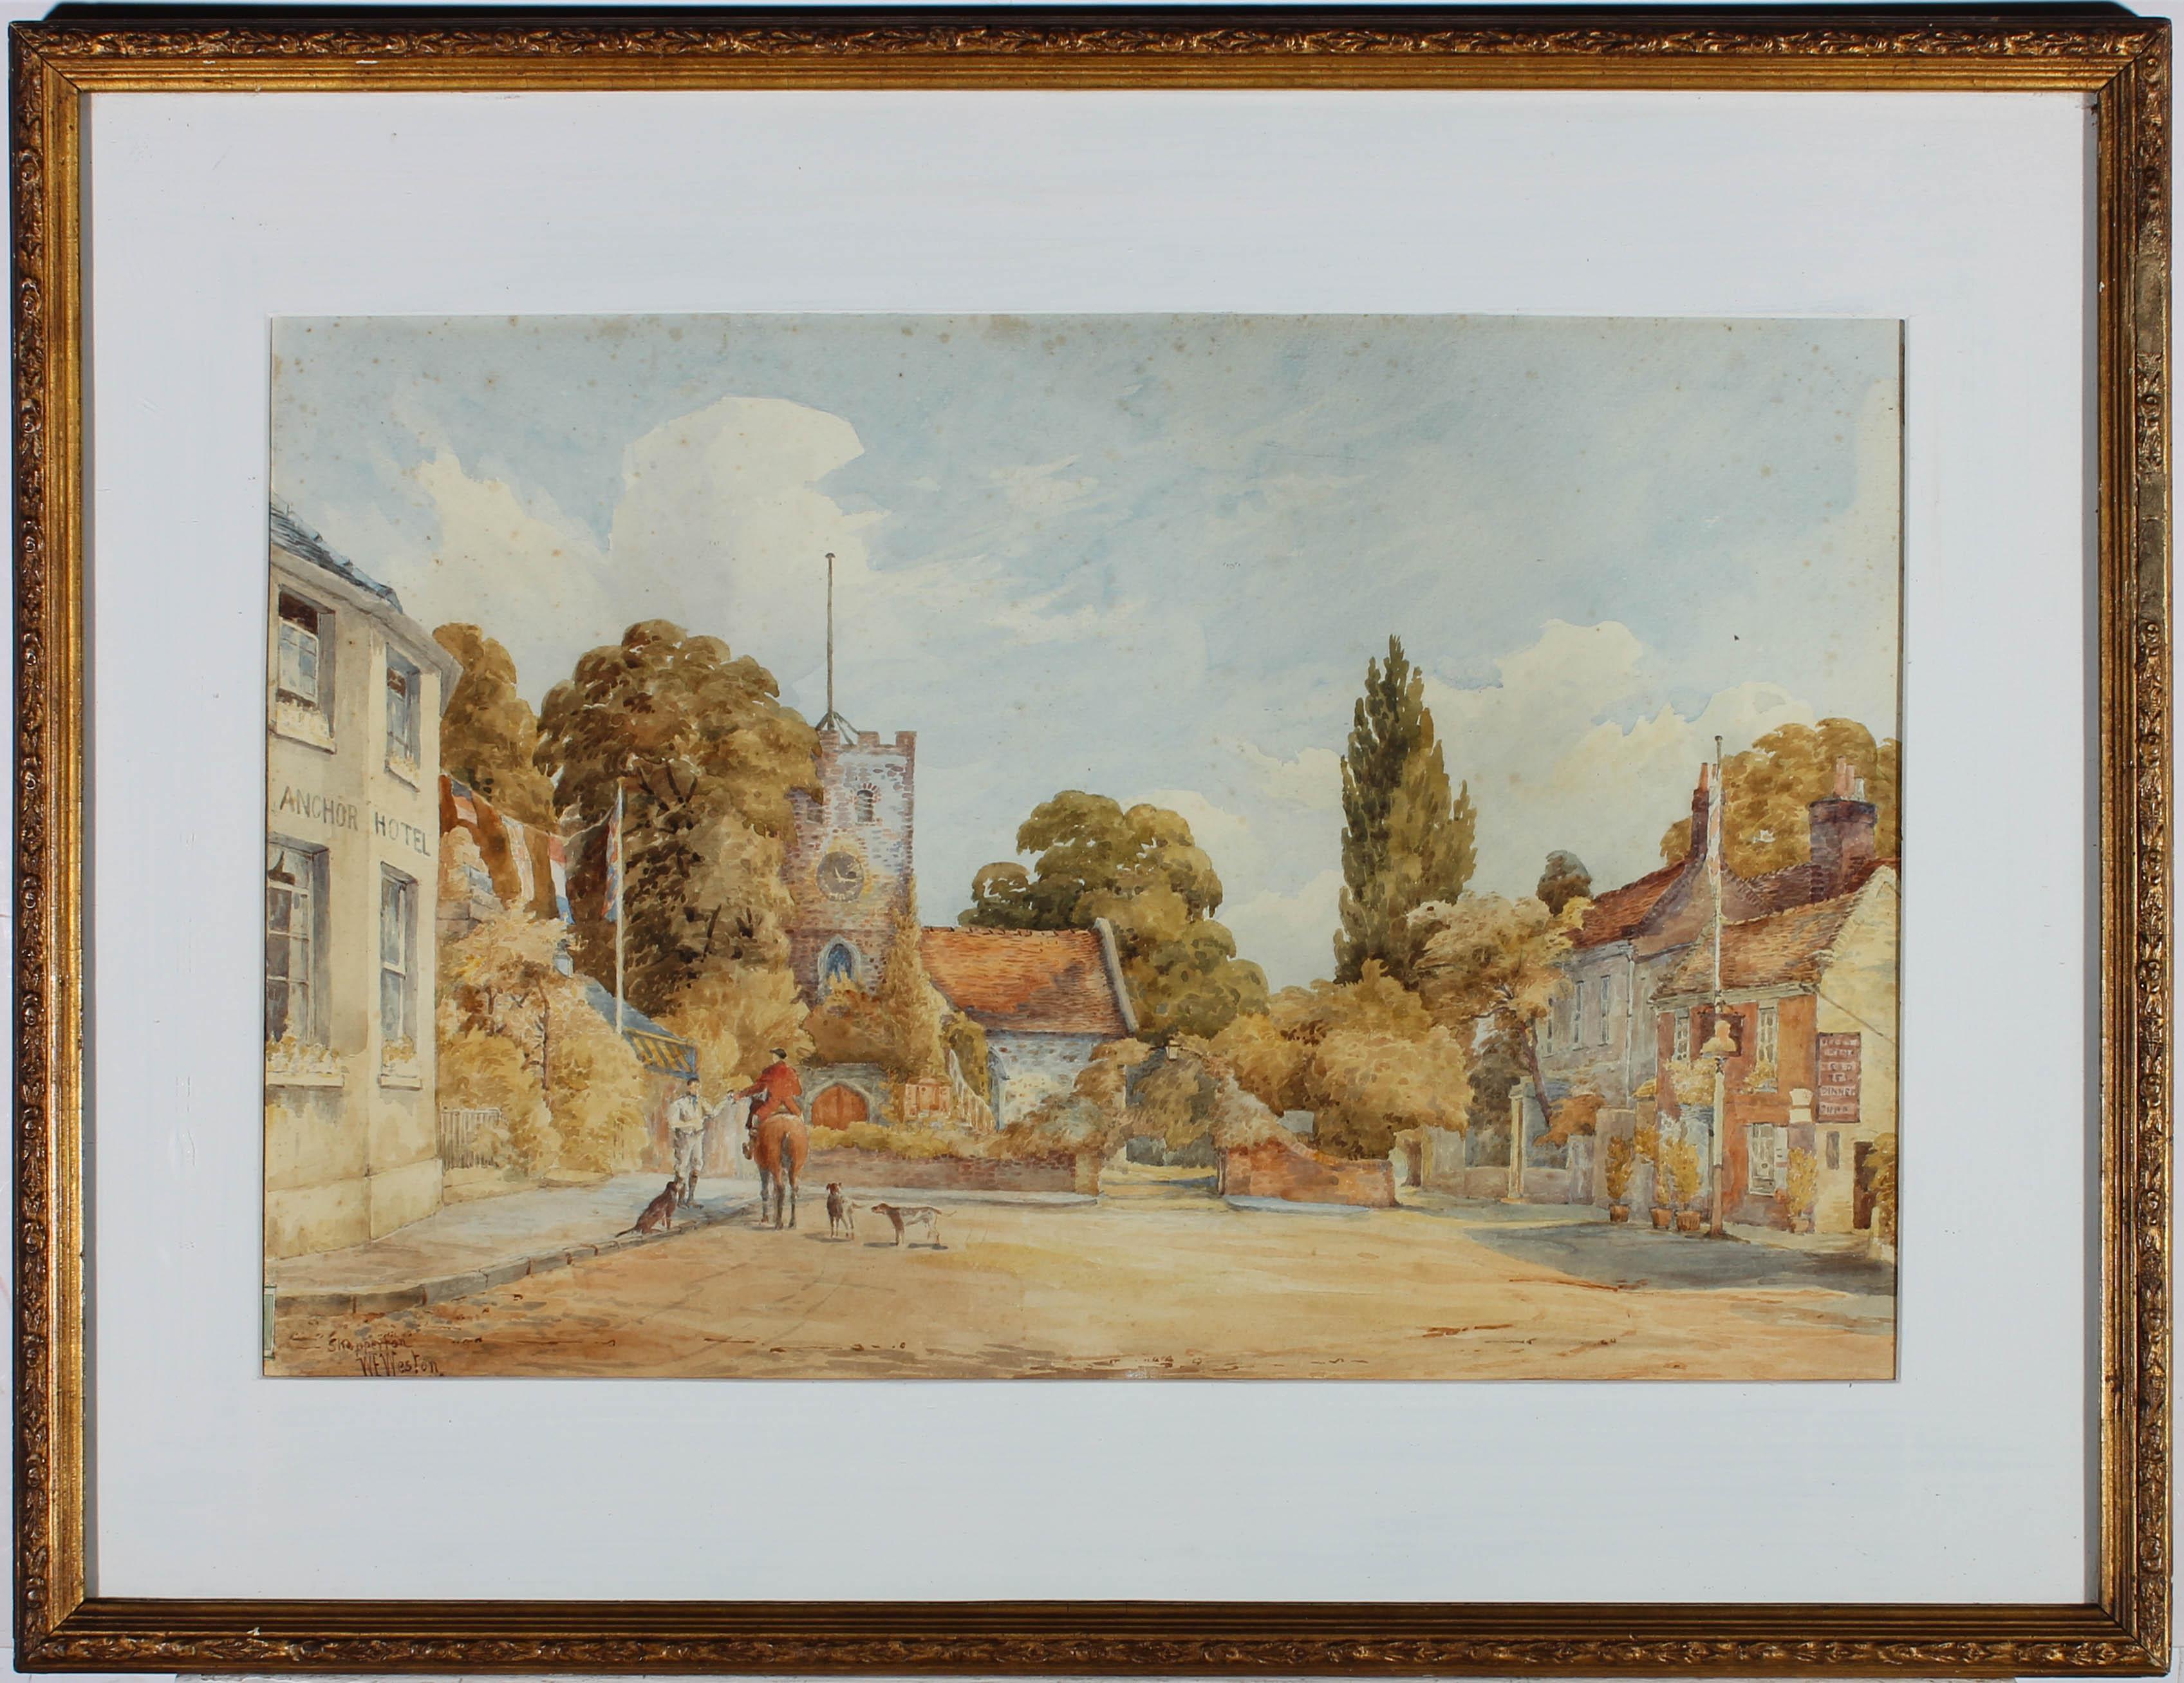 A charming watercolours painting of the village of Shepperton in Surrey. The artist has depicted a huntsman on horseback clinking drinks in celebration with a friend, outside the local hotel-pub and church. Signed to the lower left-hand corner. Well